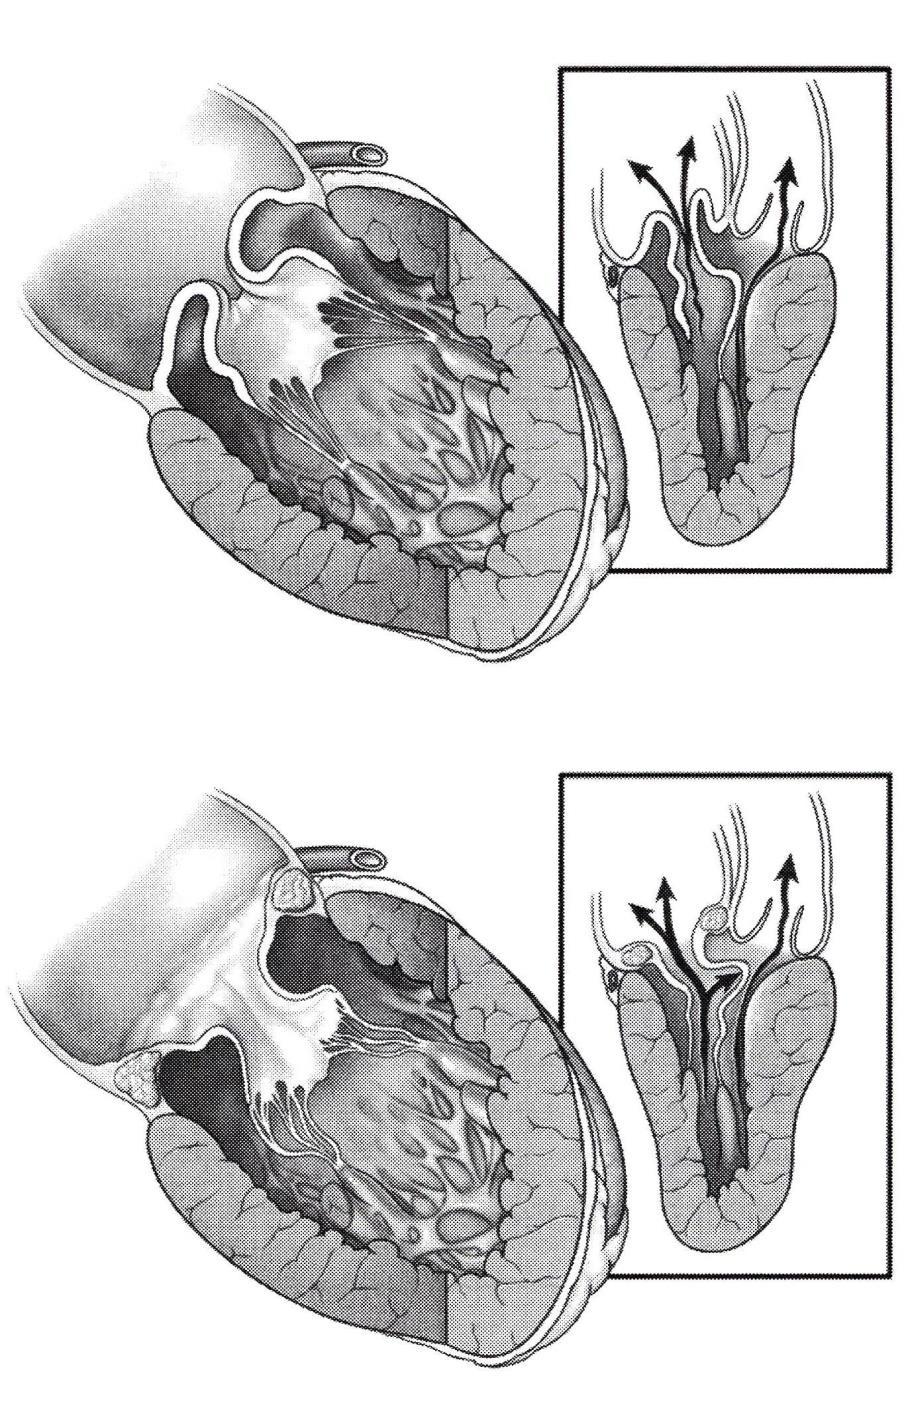 HOCM and mitral valve morphology Myxomatous with thickened redundant leaflets Restrictive leaflet: thickened leaflet often associated with annular